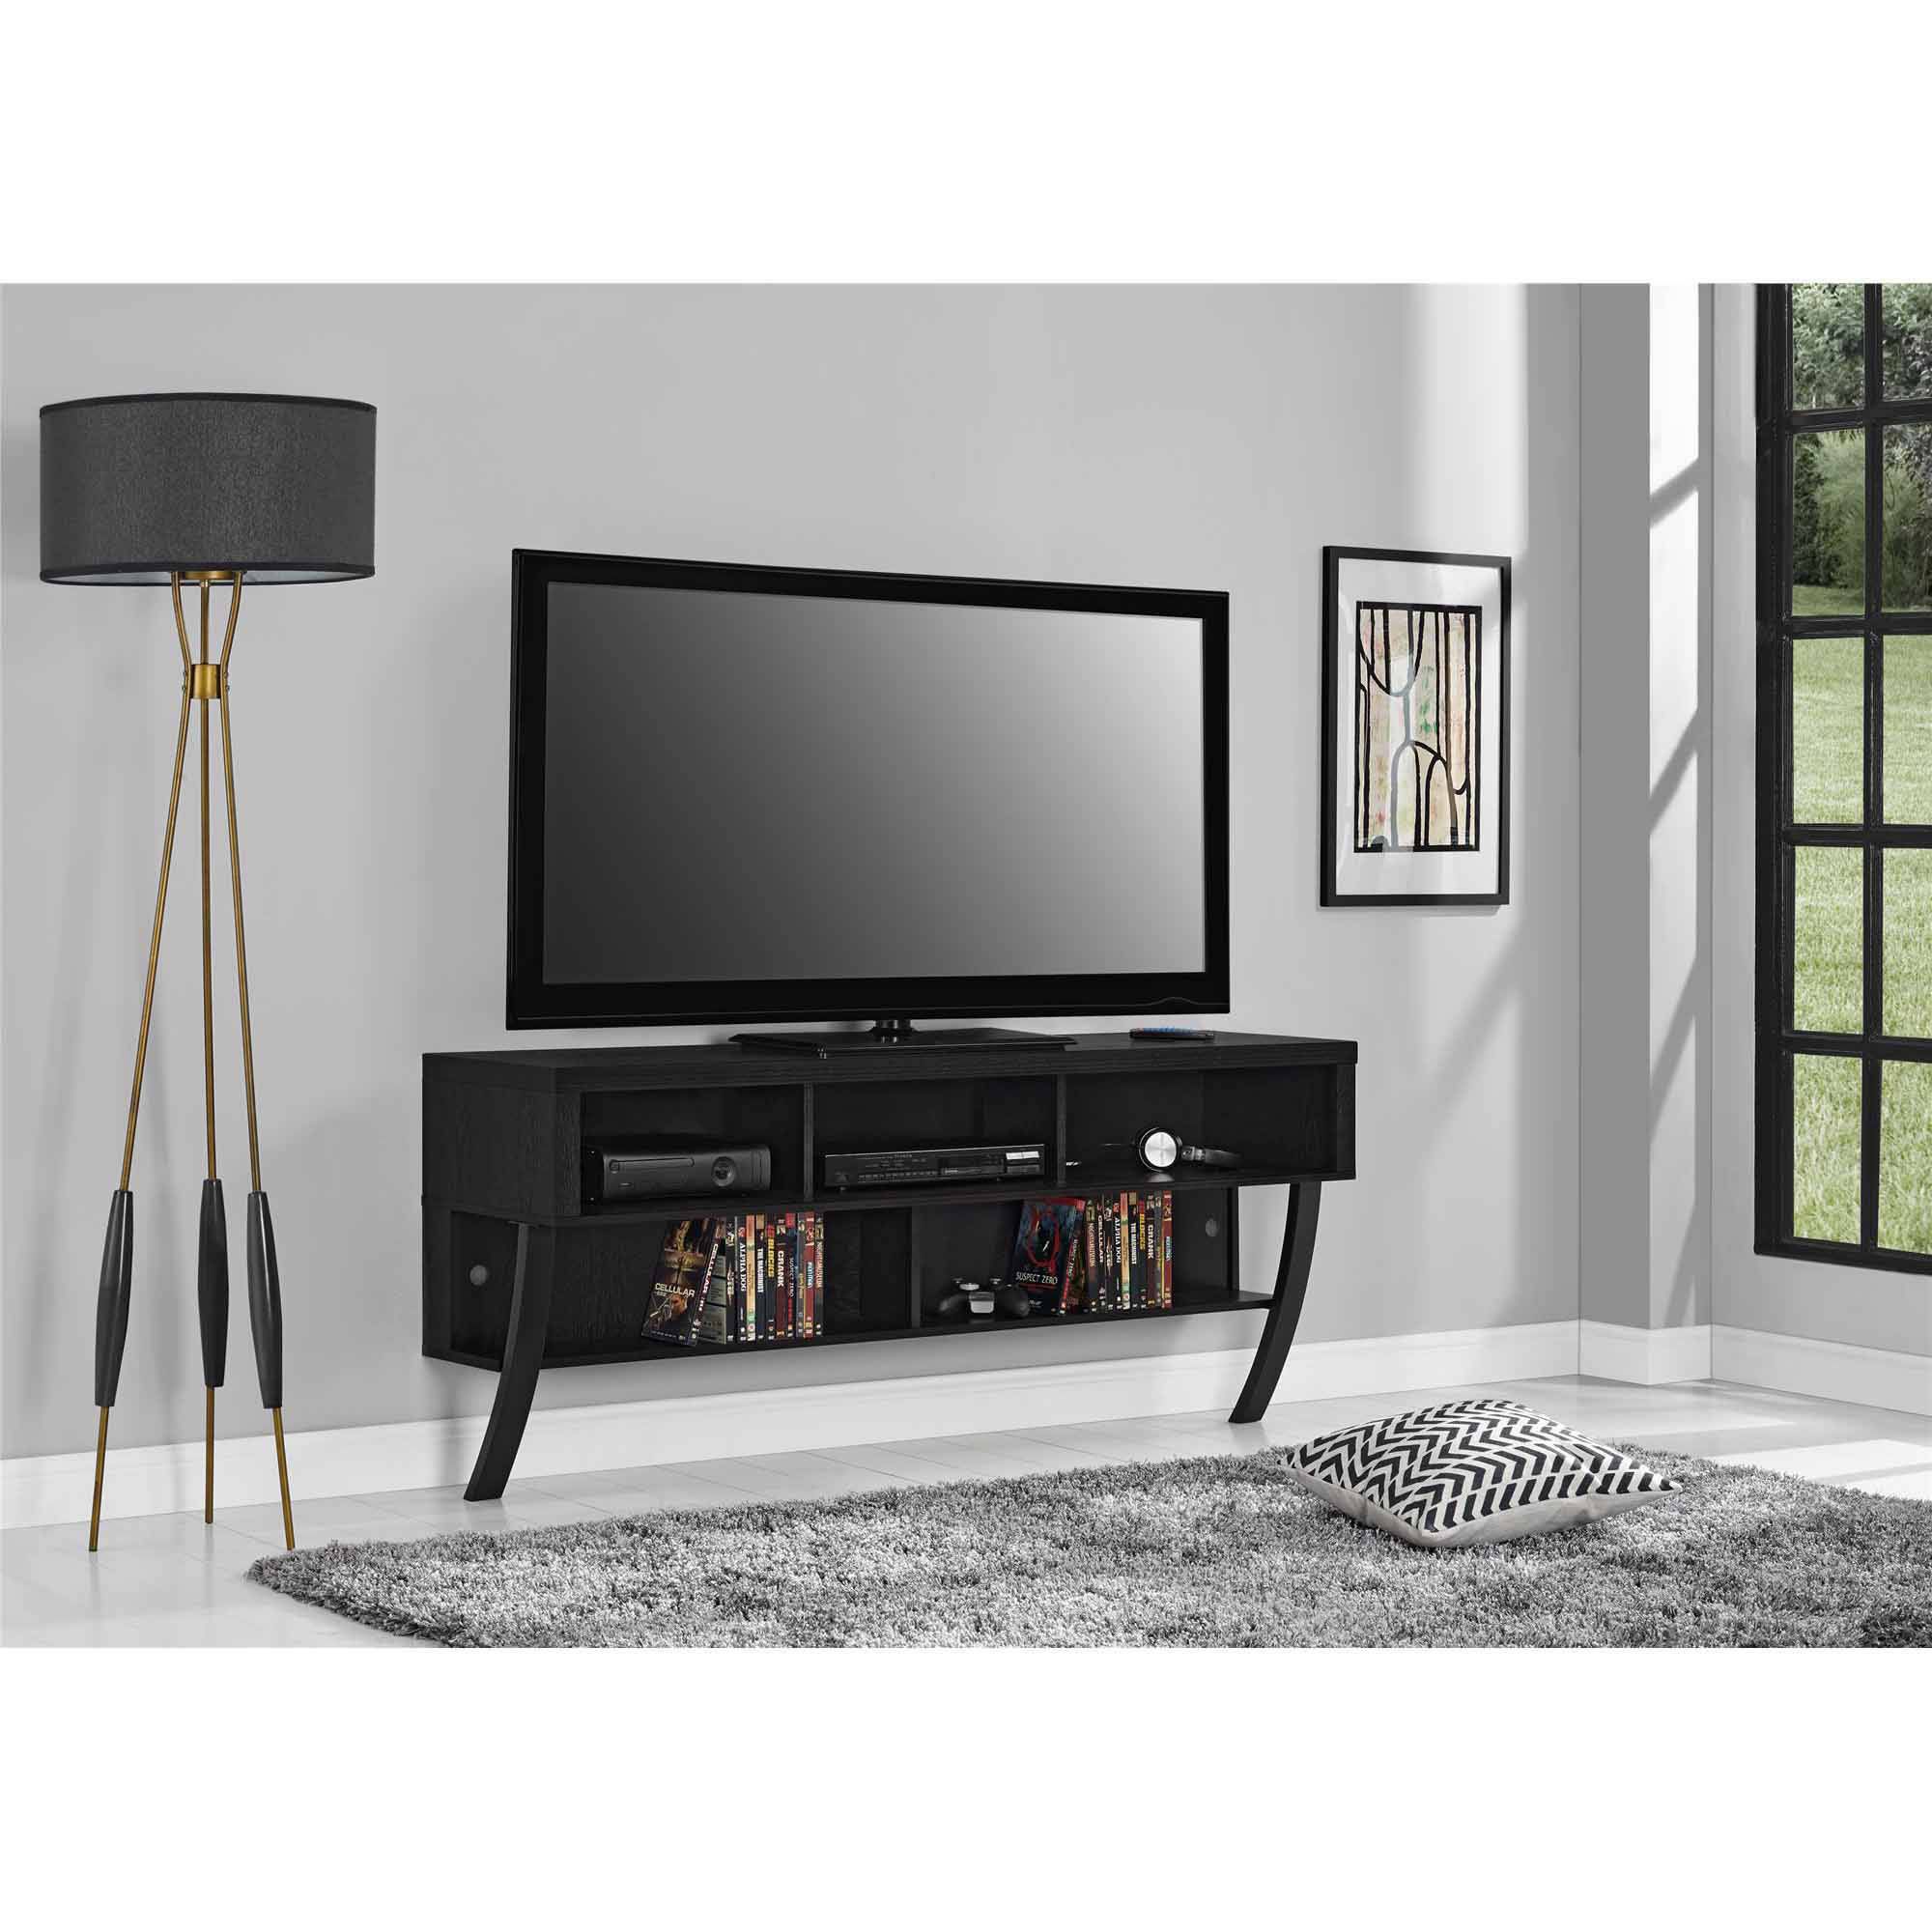 Altra Asher Wall Mounted 65" Tv Stand, Black Oak – Walmart With Regard To Wall Mounted Under Tv Cabinet (View 8 of 15)